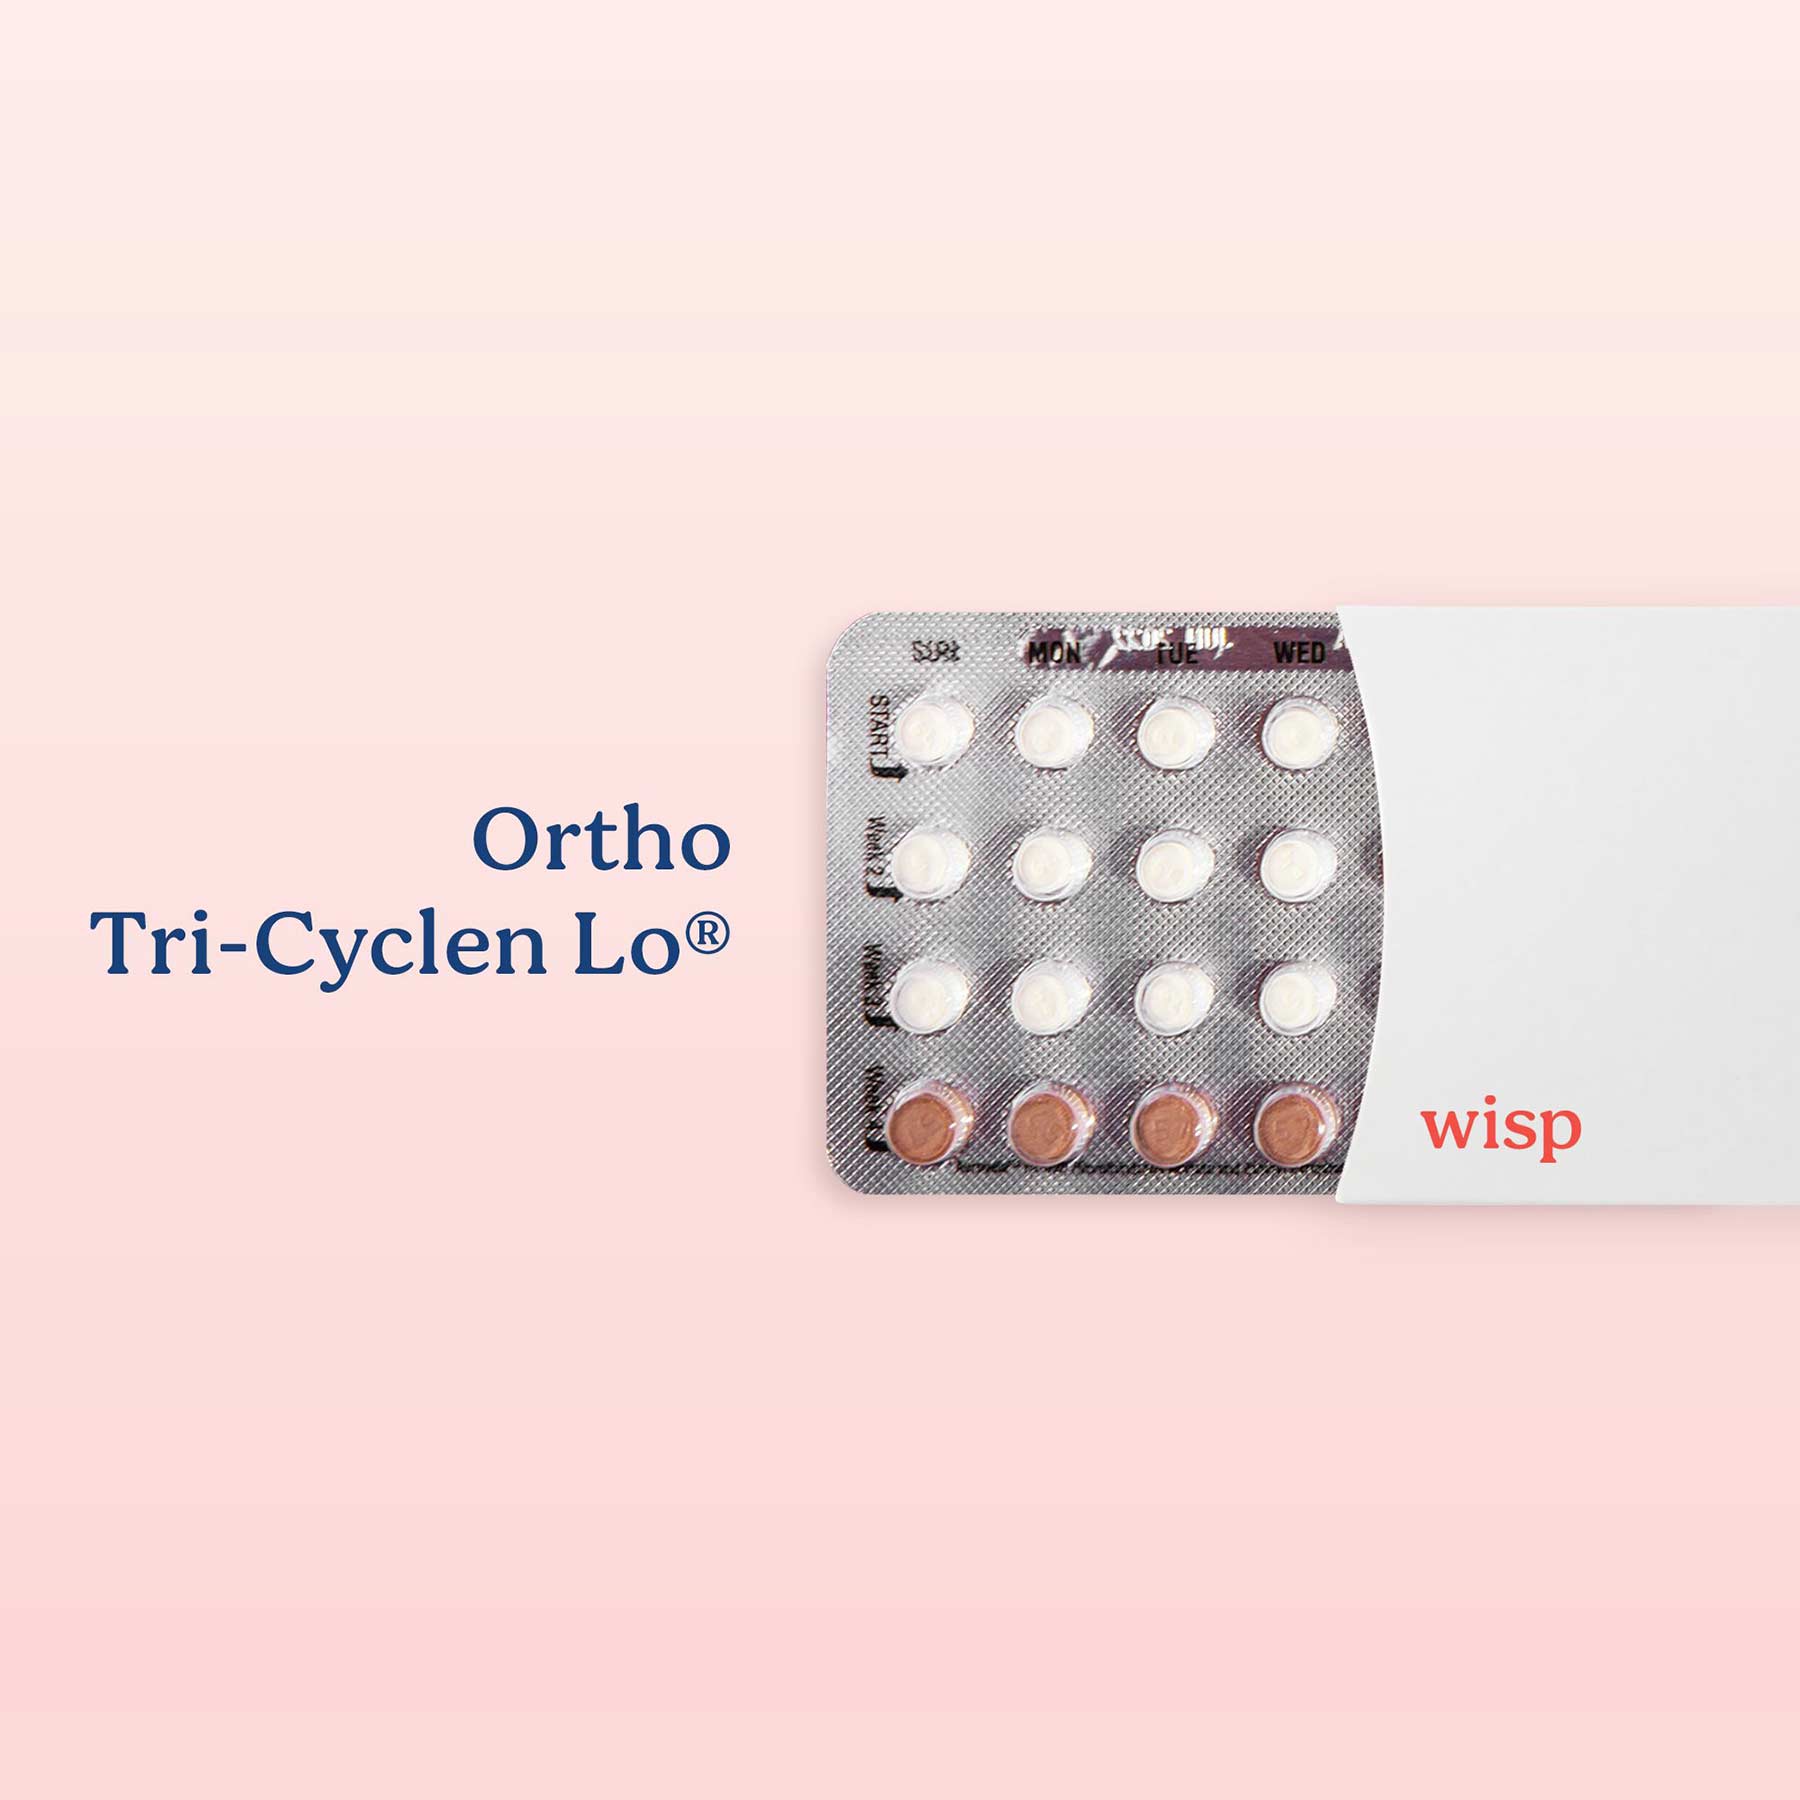 Packet of Ortho Tri-Cyclen-Lo birth control pills on a pink background